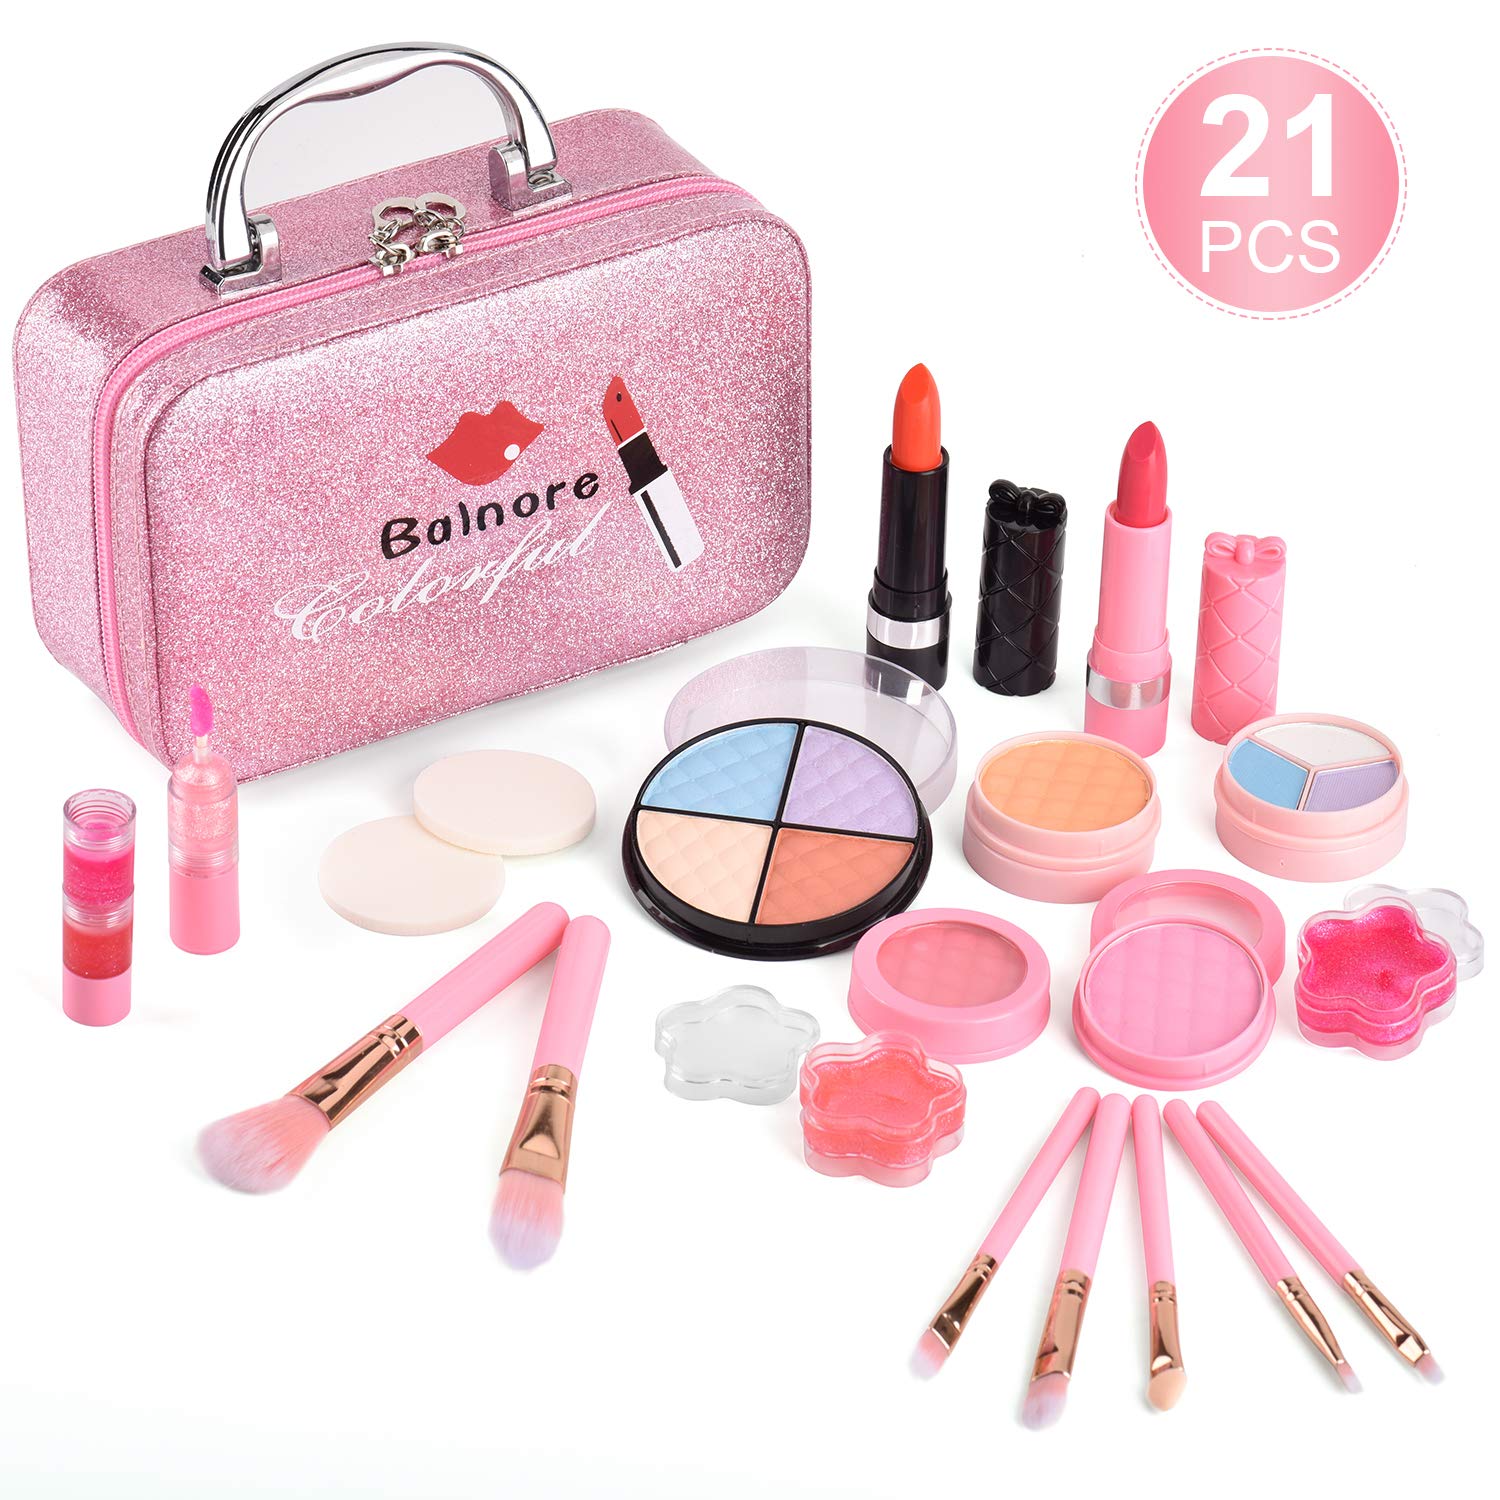 Balnore 21 Pcs Kids Makeup Kit for Girl, Washable Makeup Toy Set, Safe & Non-Toxic,Real Cosmetic Beauty Set for Kids Play Game Halloween Christmas Birthday Party